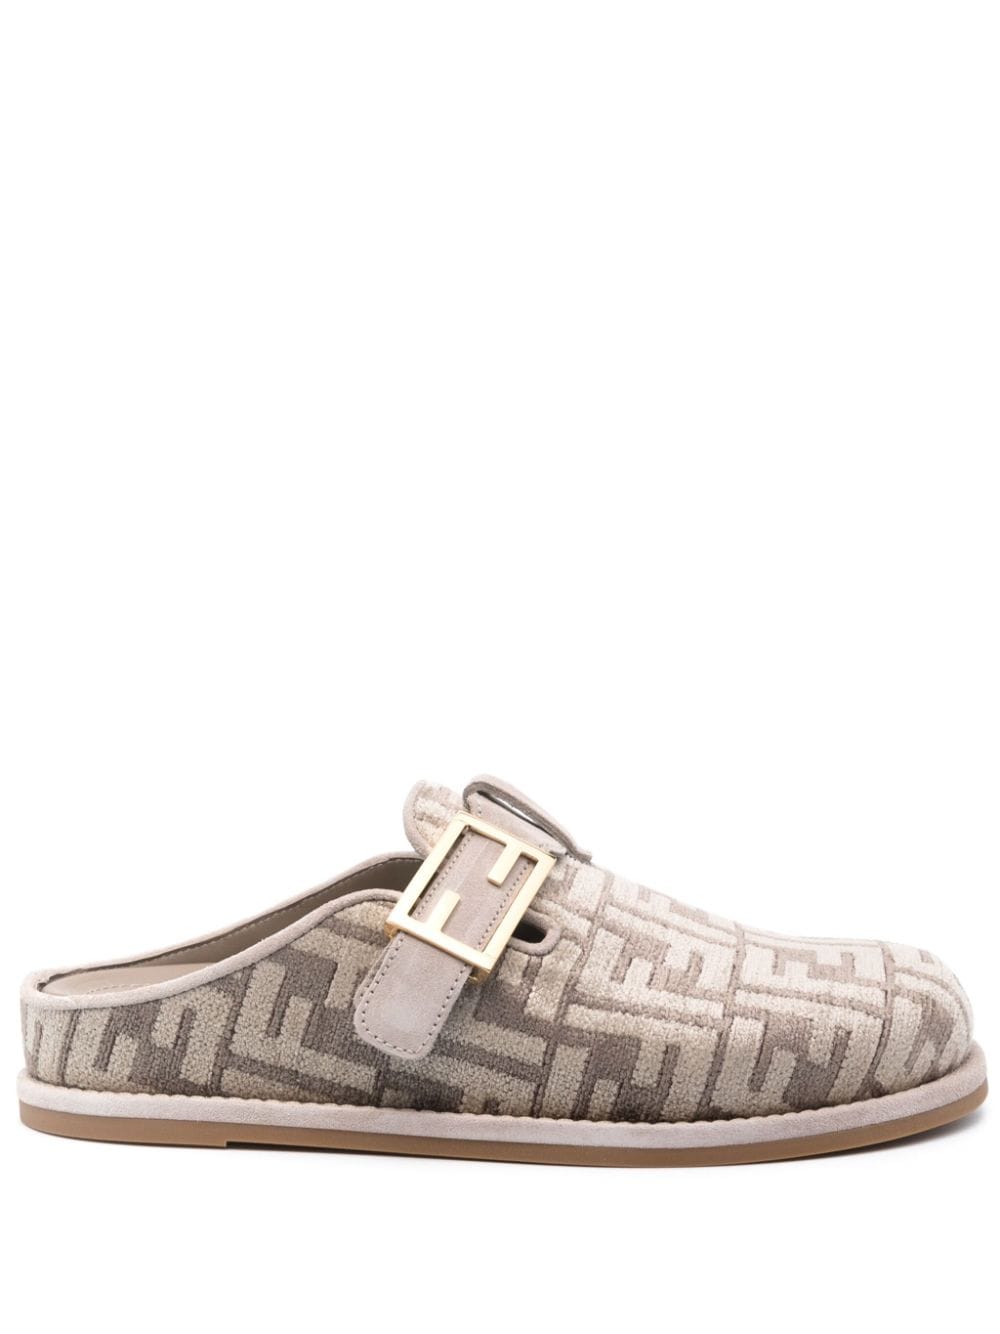 Fendi Ff Buckle Leather Slides In Neutral